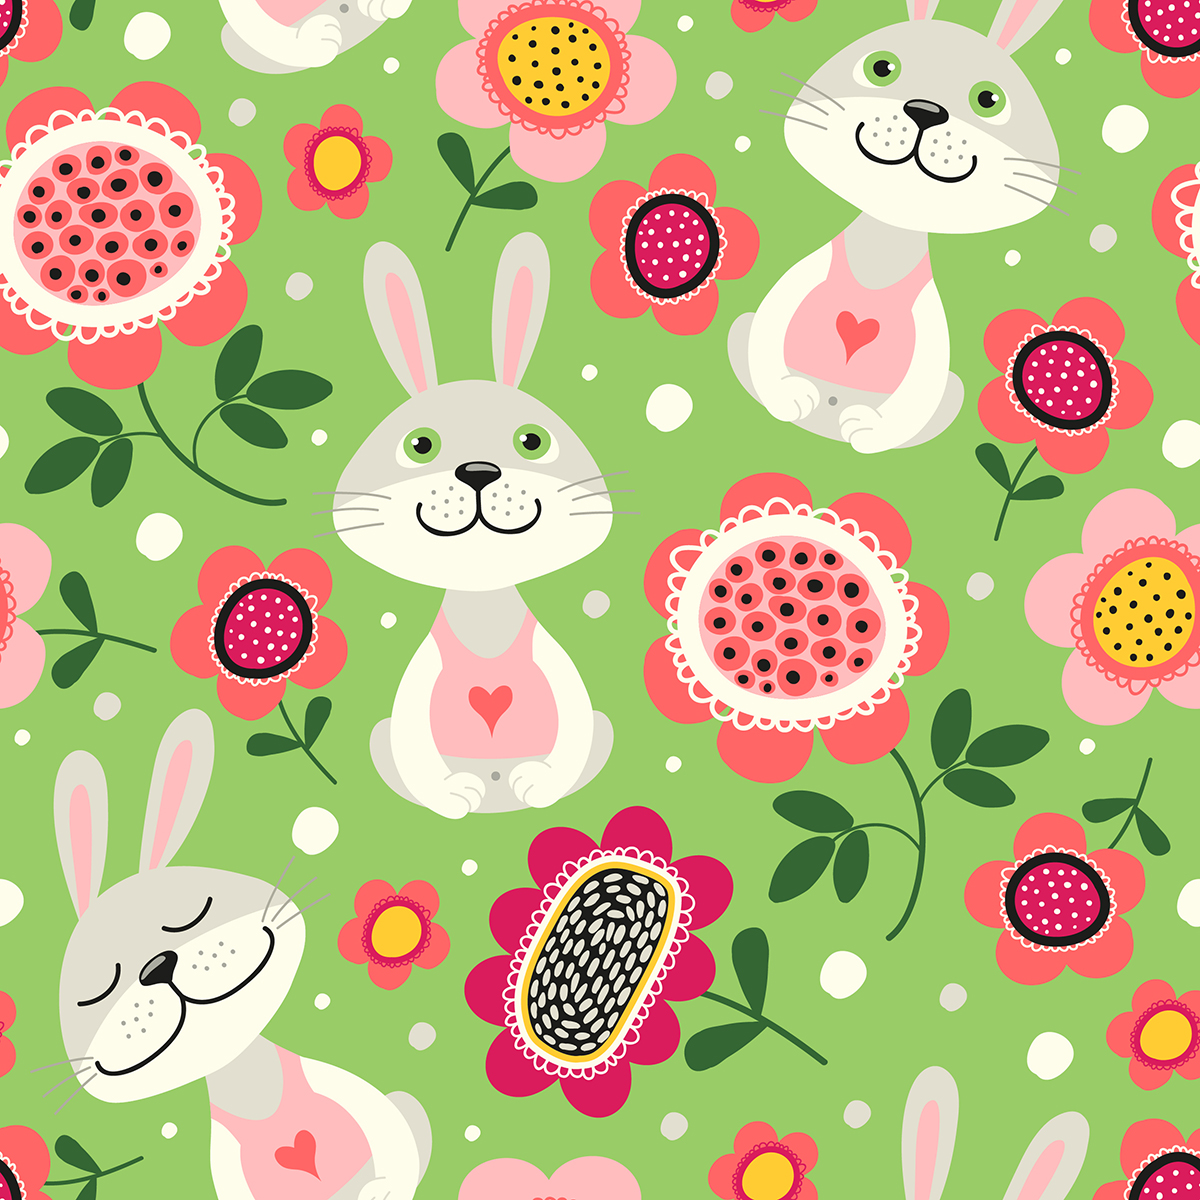 A pattern of flowers and rabbits